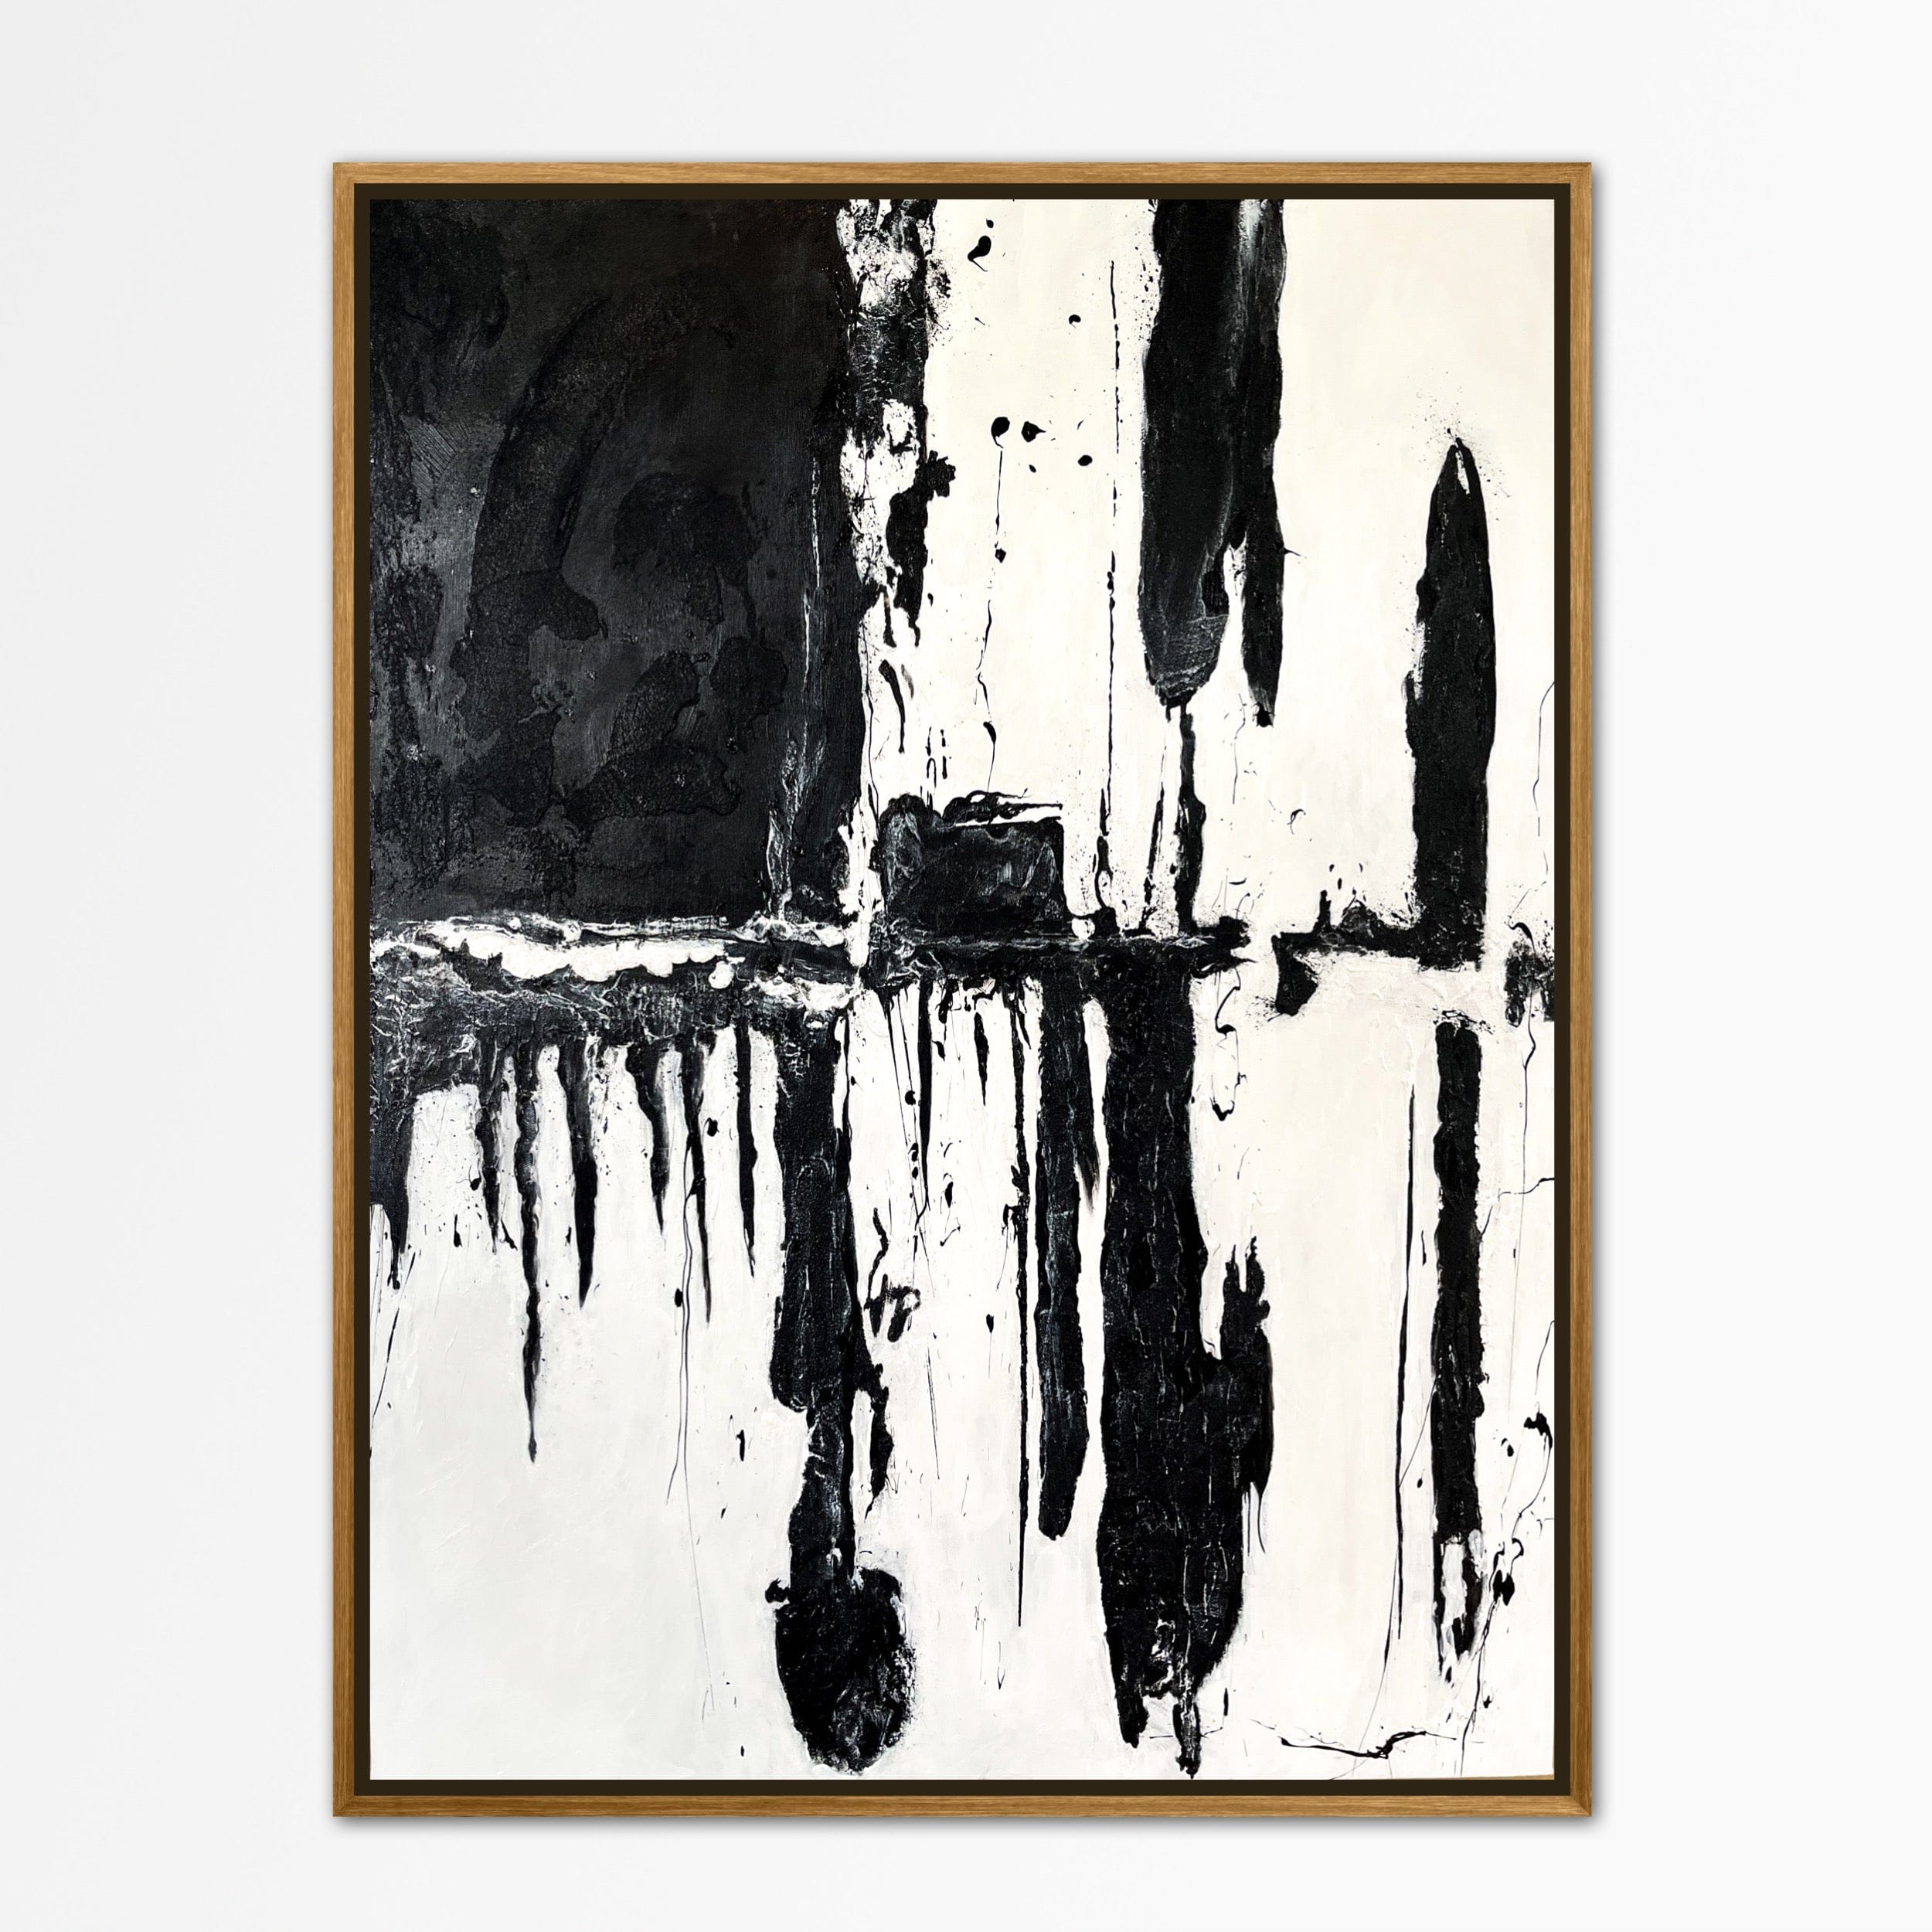 Artworld Wall Art Copy of Original Black and White Abstract Painting